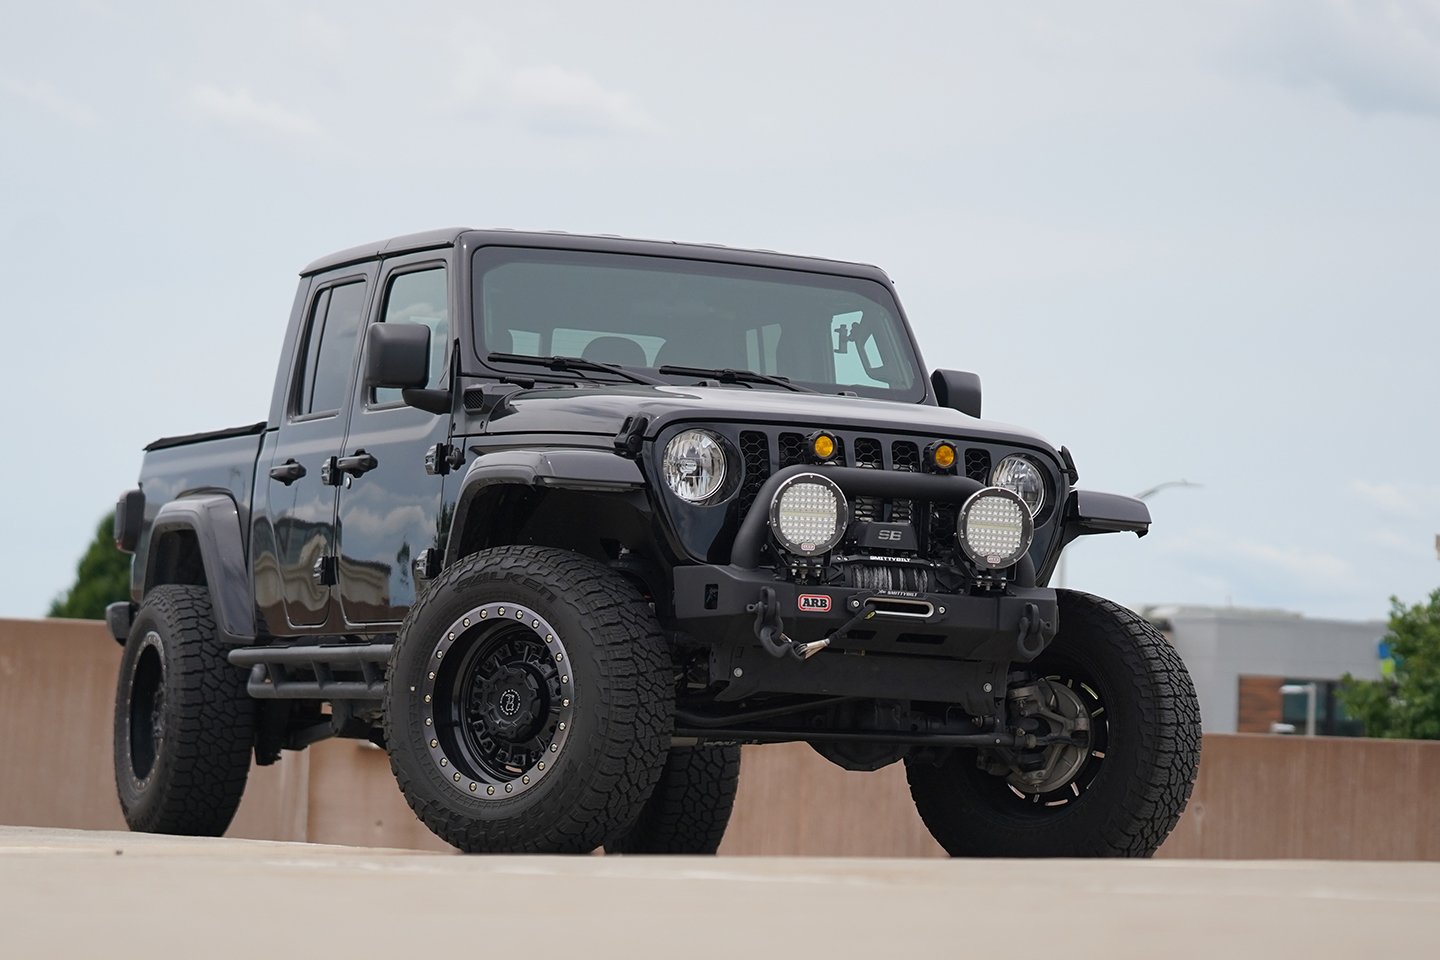 400 HP Upgrade For Jeep Wrangler Or Gladiator With ProCharger